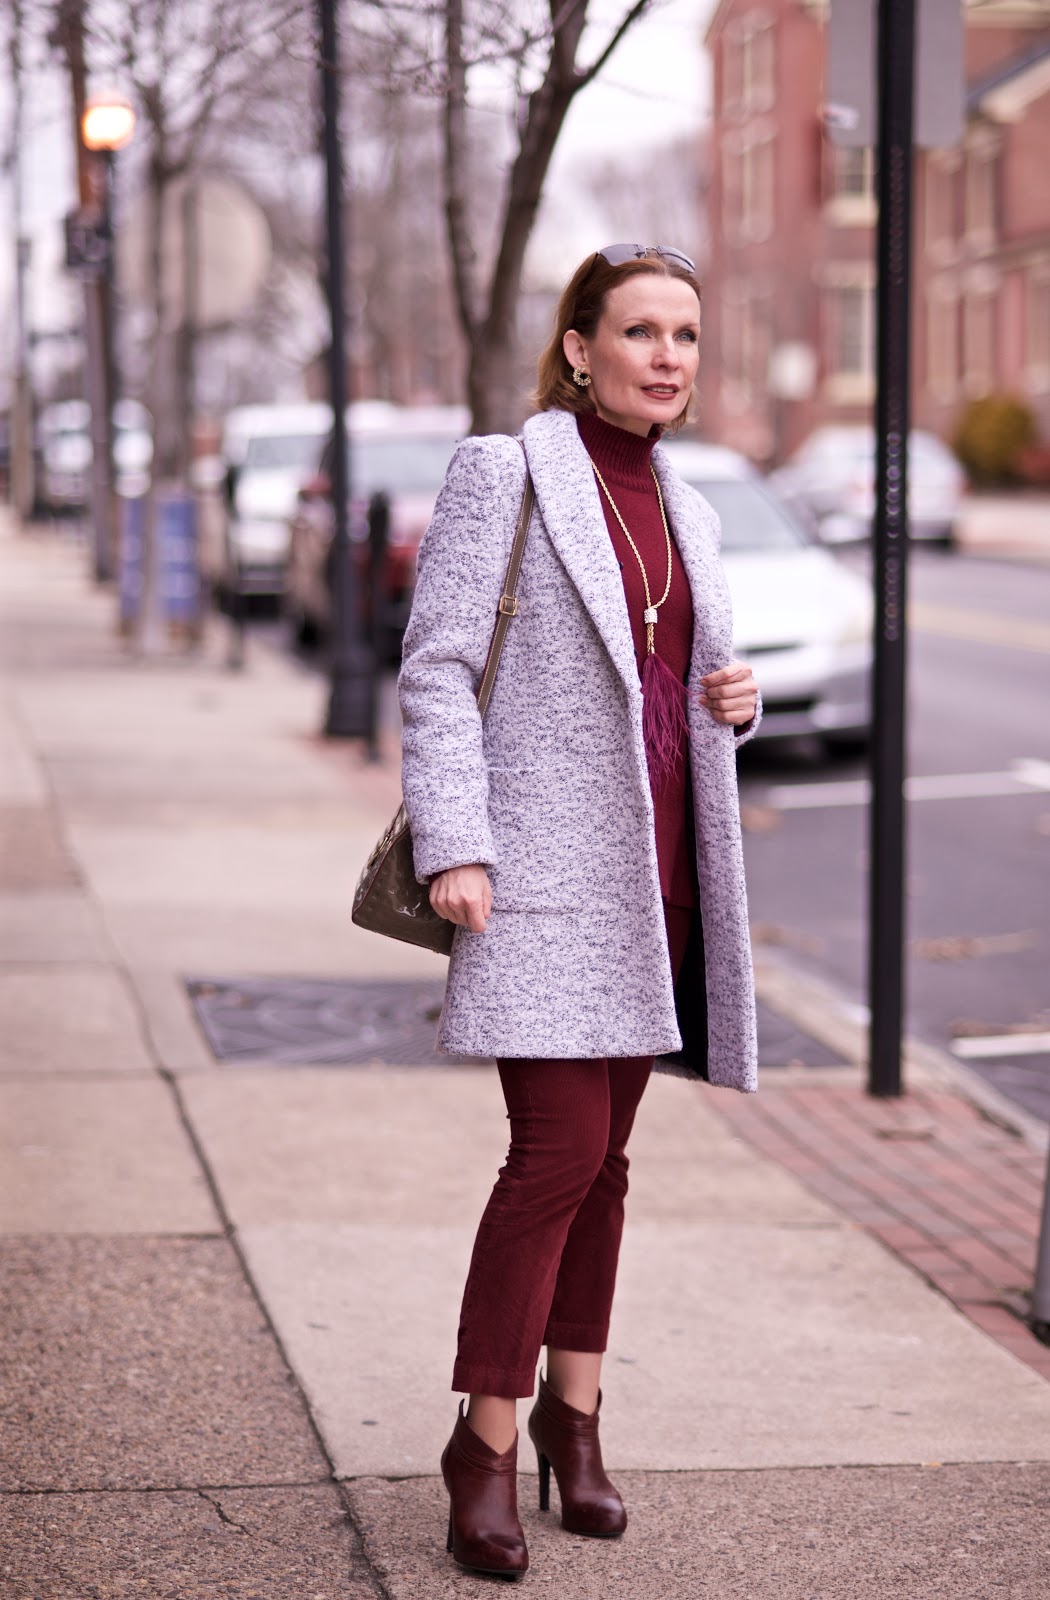 Perfectly matched burgundy